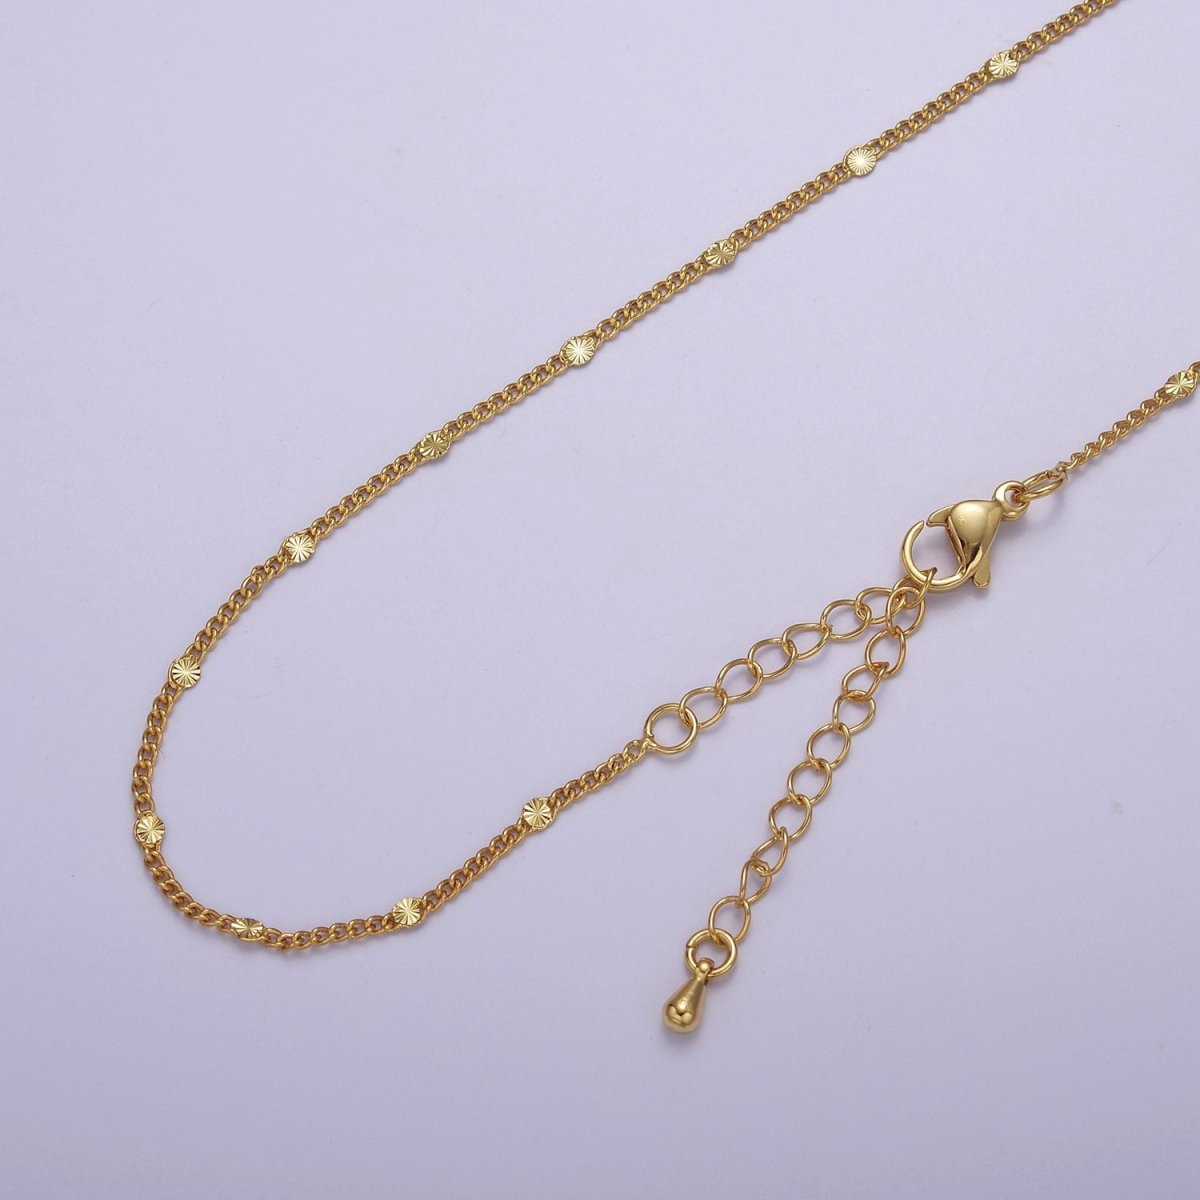 OS Dainty Sunburst Curb Chain Necklace ∙ 14K Gold Filled Necklace Curb Link Chain 18 inch + 2.5 inch extender Ready to Wear | WA-937 Clearance Pricing - DLUXCA